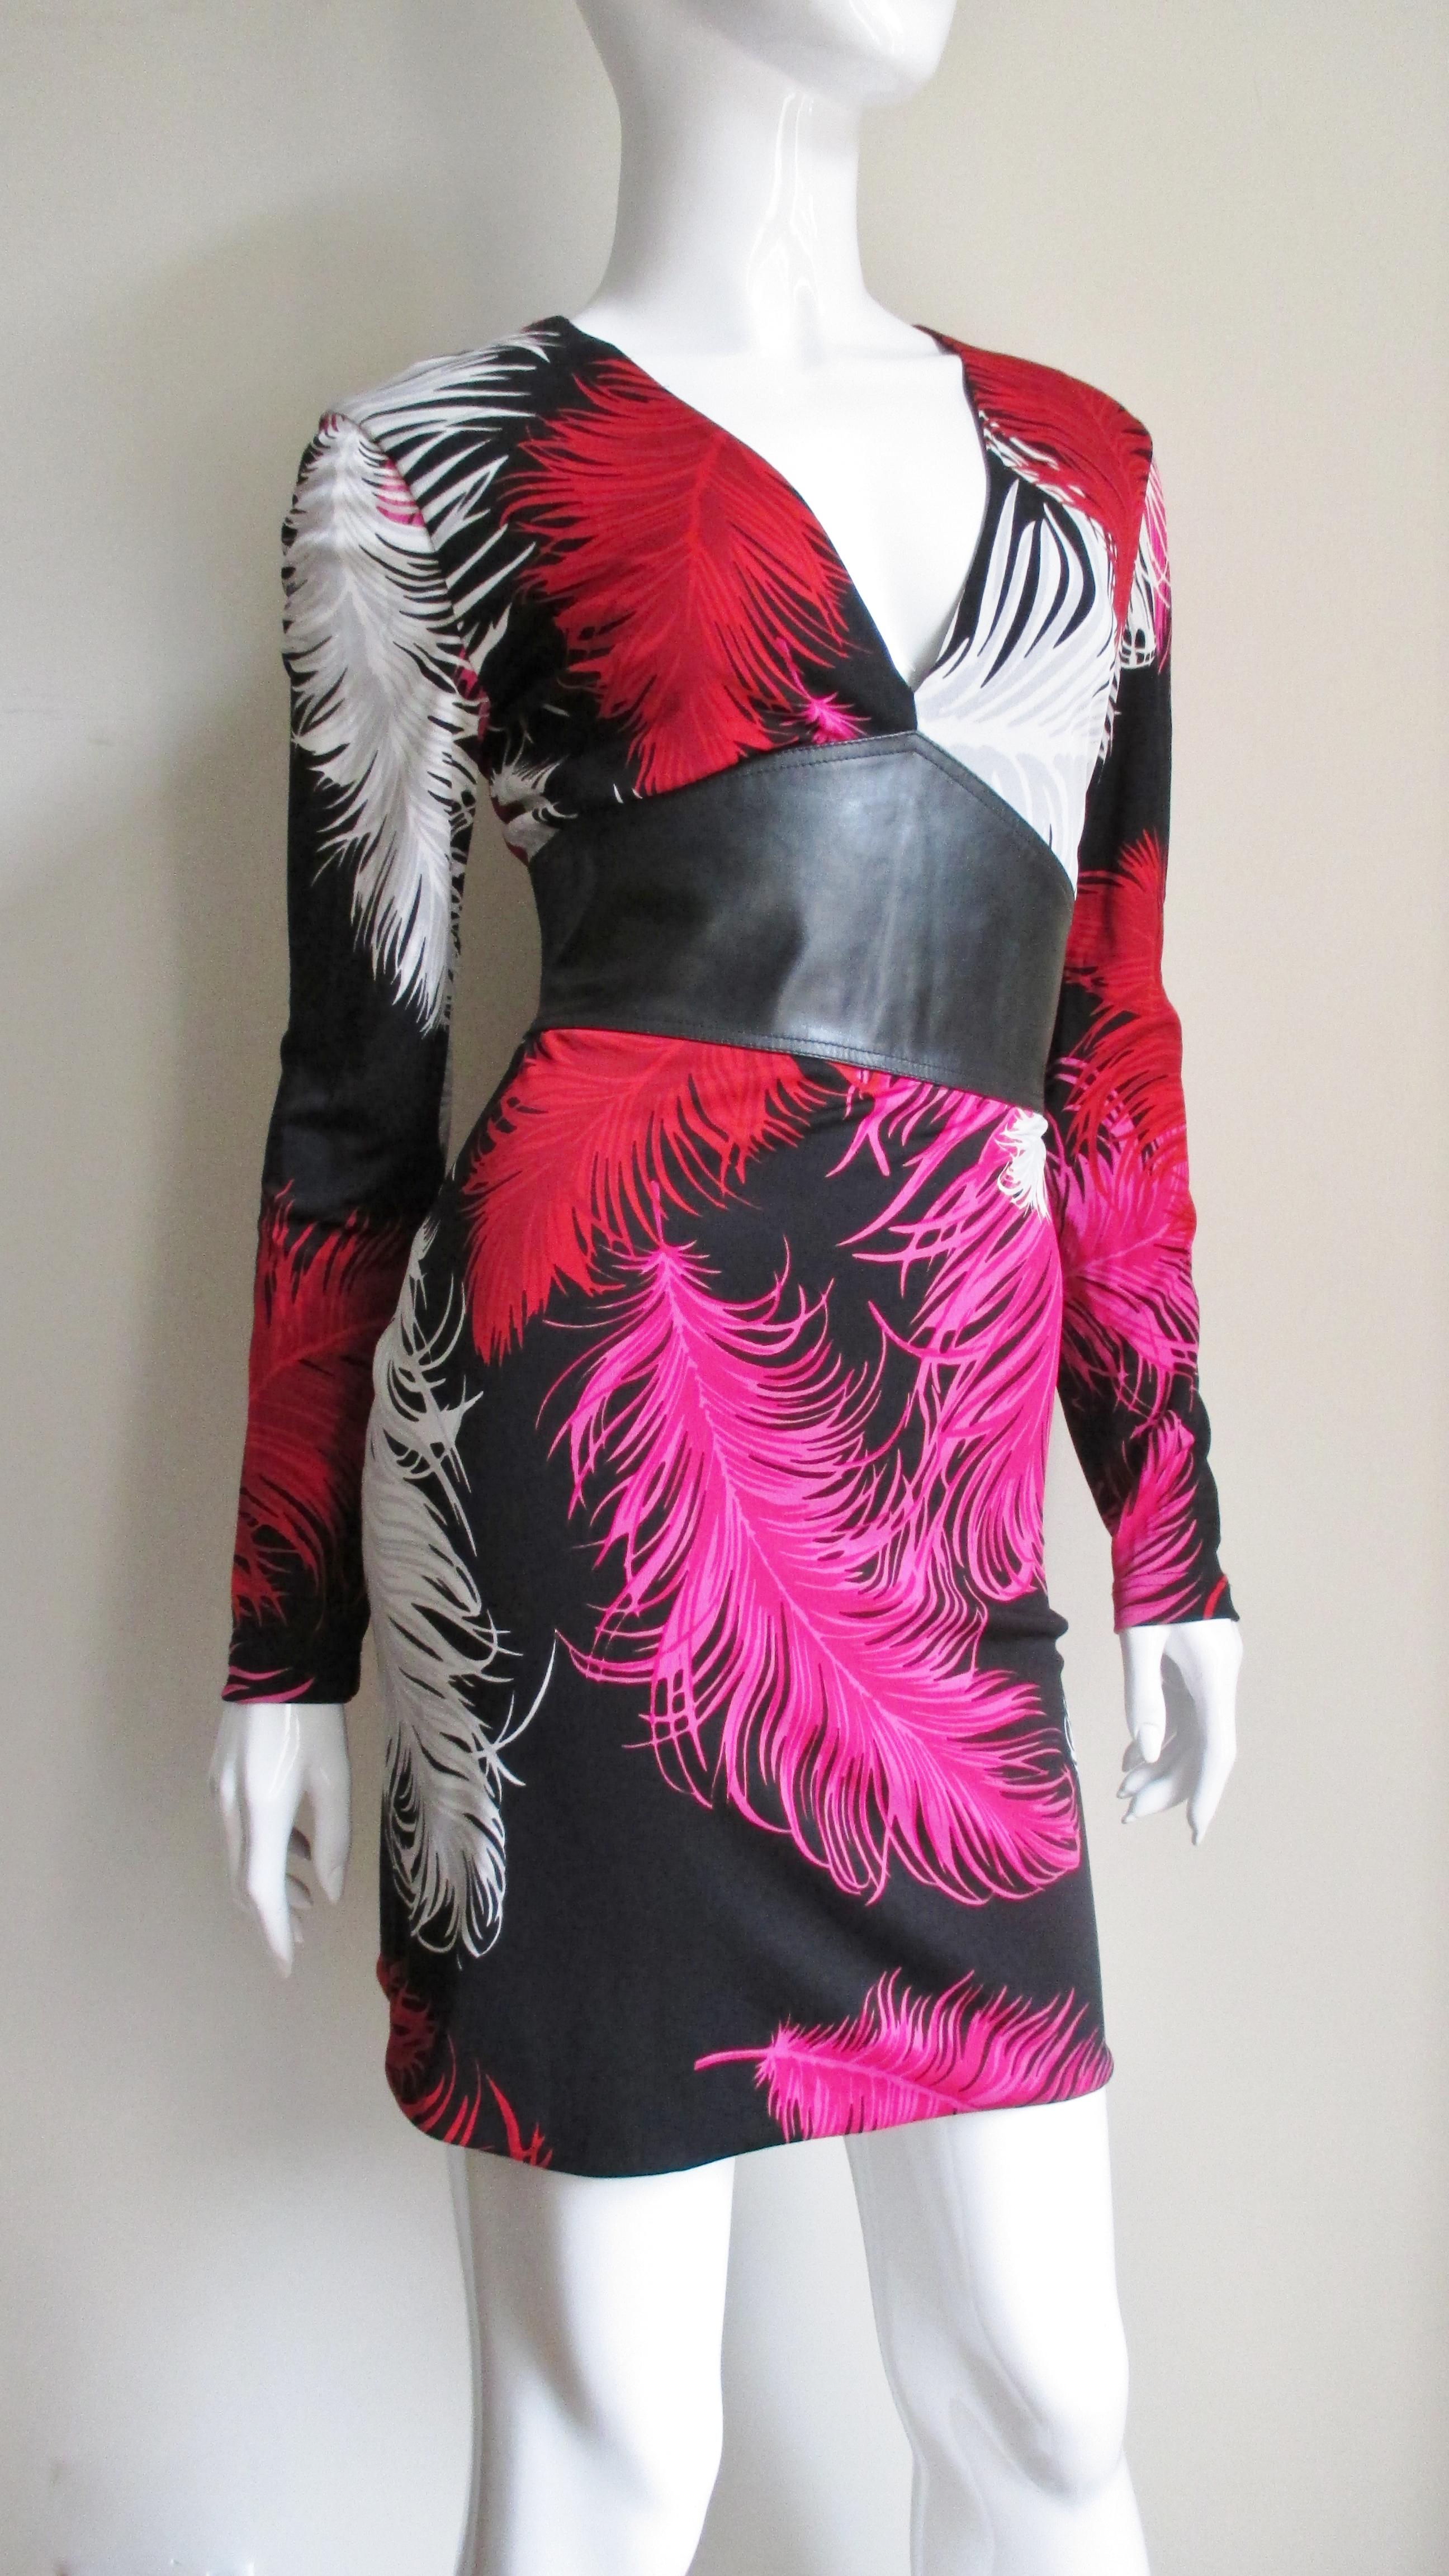 A stunning silk jersey dress from Gianni Versace Couture in a bright pink, red, white and grey feather print.  It has long sleeves and a V neckline which meets a wide front black leather inset around the waist narrowing in the back. The skirt is